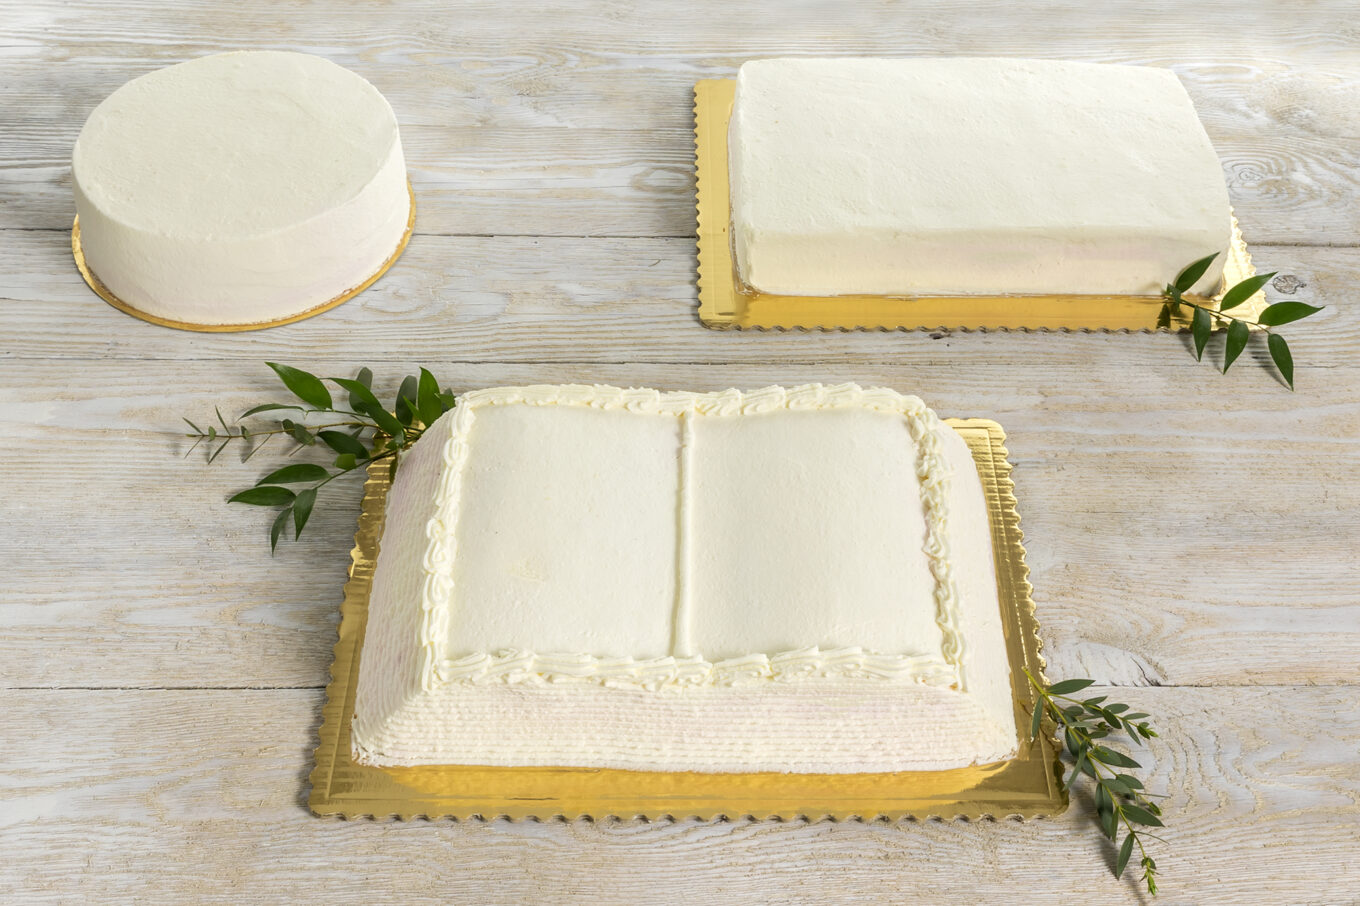 cake shapes Cukiernia Jacek Placek is synonymous with the taste of homemade cakes made from natural products.